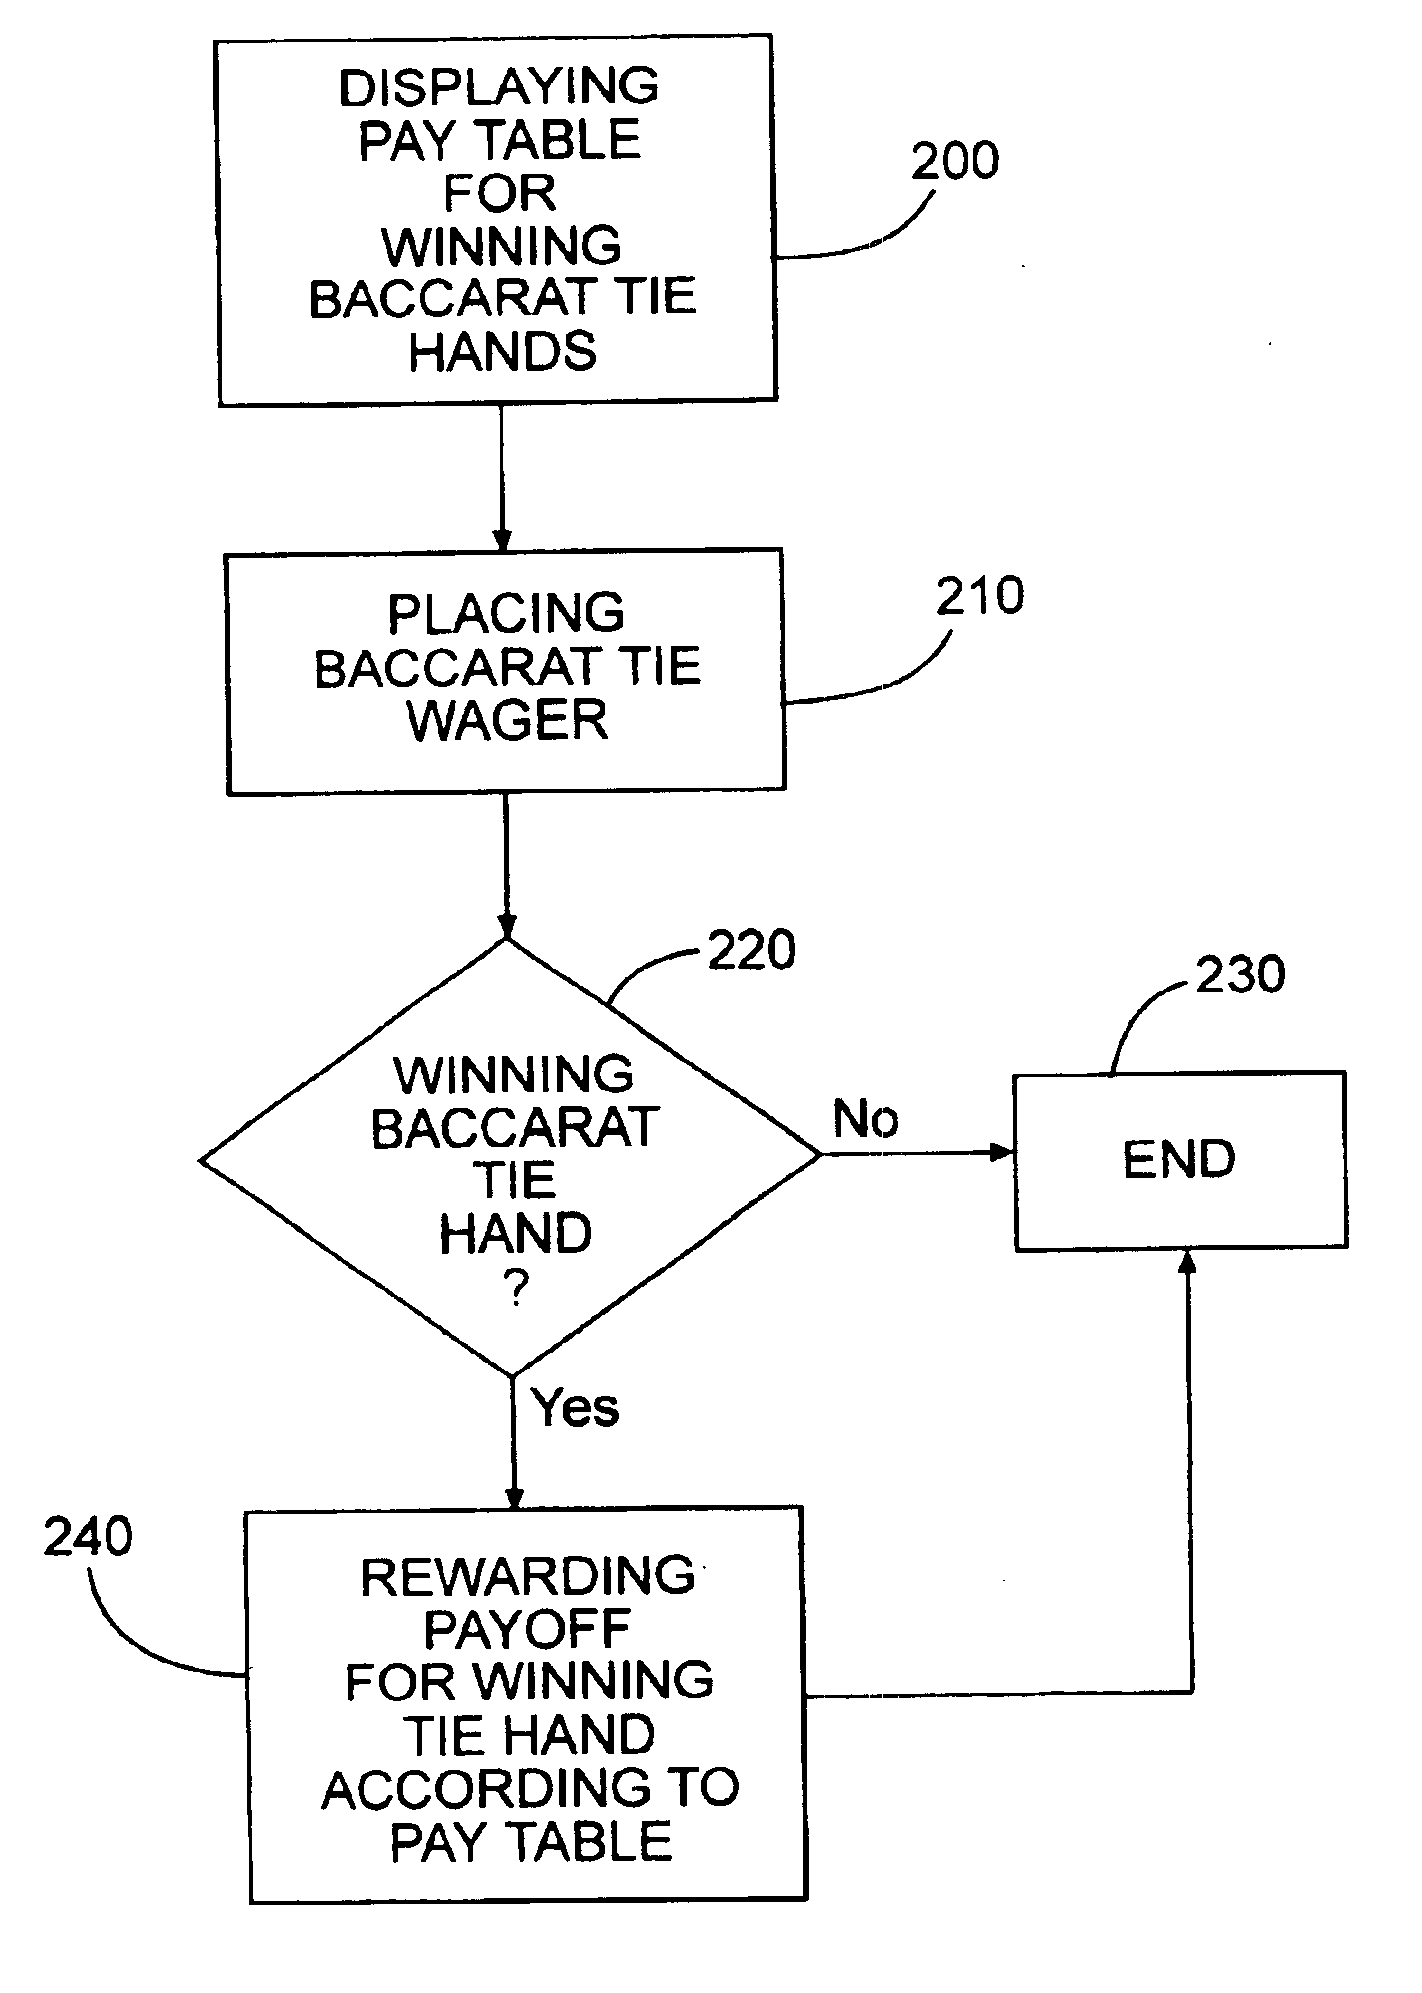 Method for wagering on baccarat tie